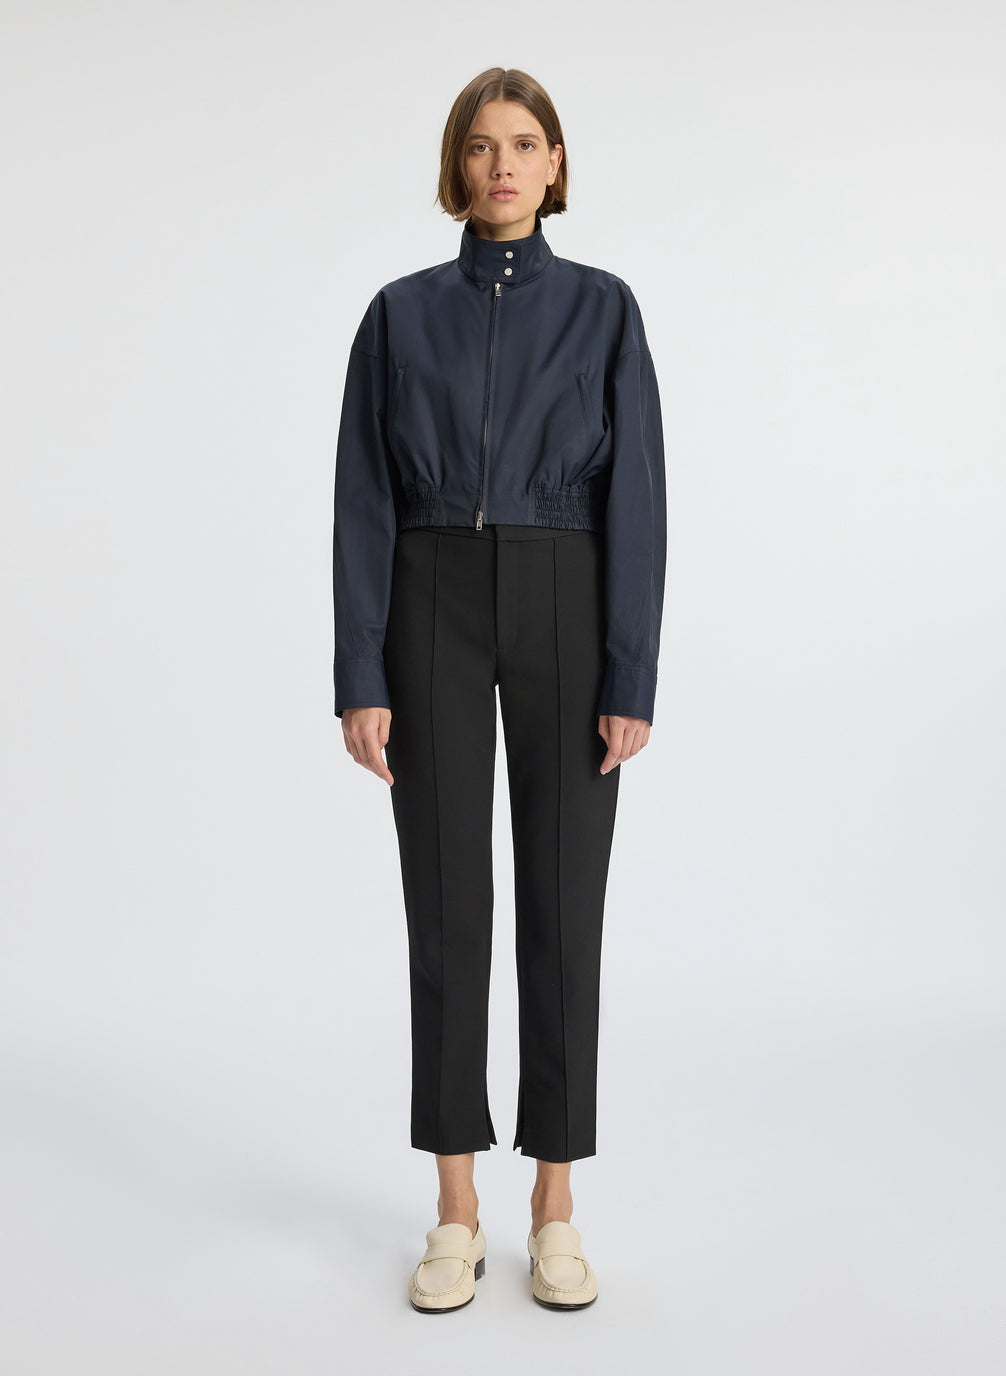 front view  view of woman in navy blue jacket and black ankle pants